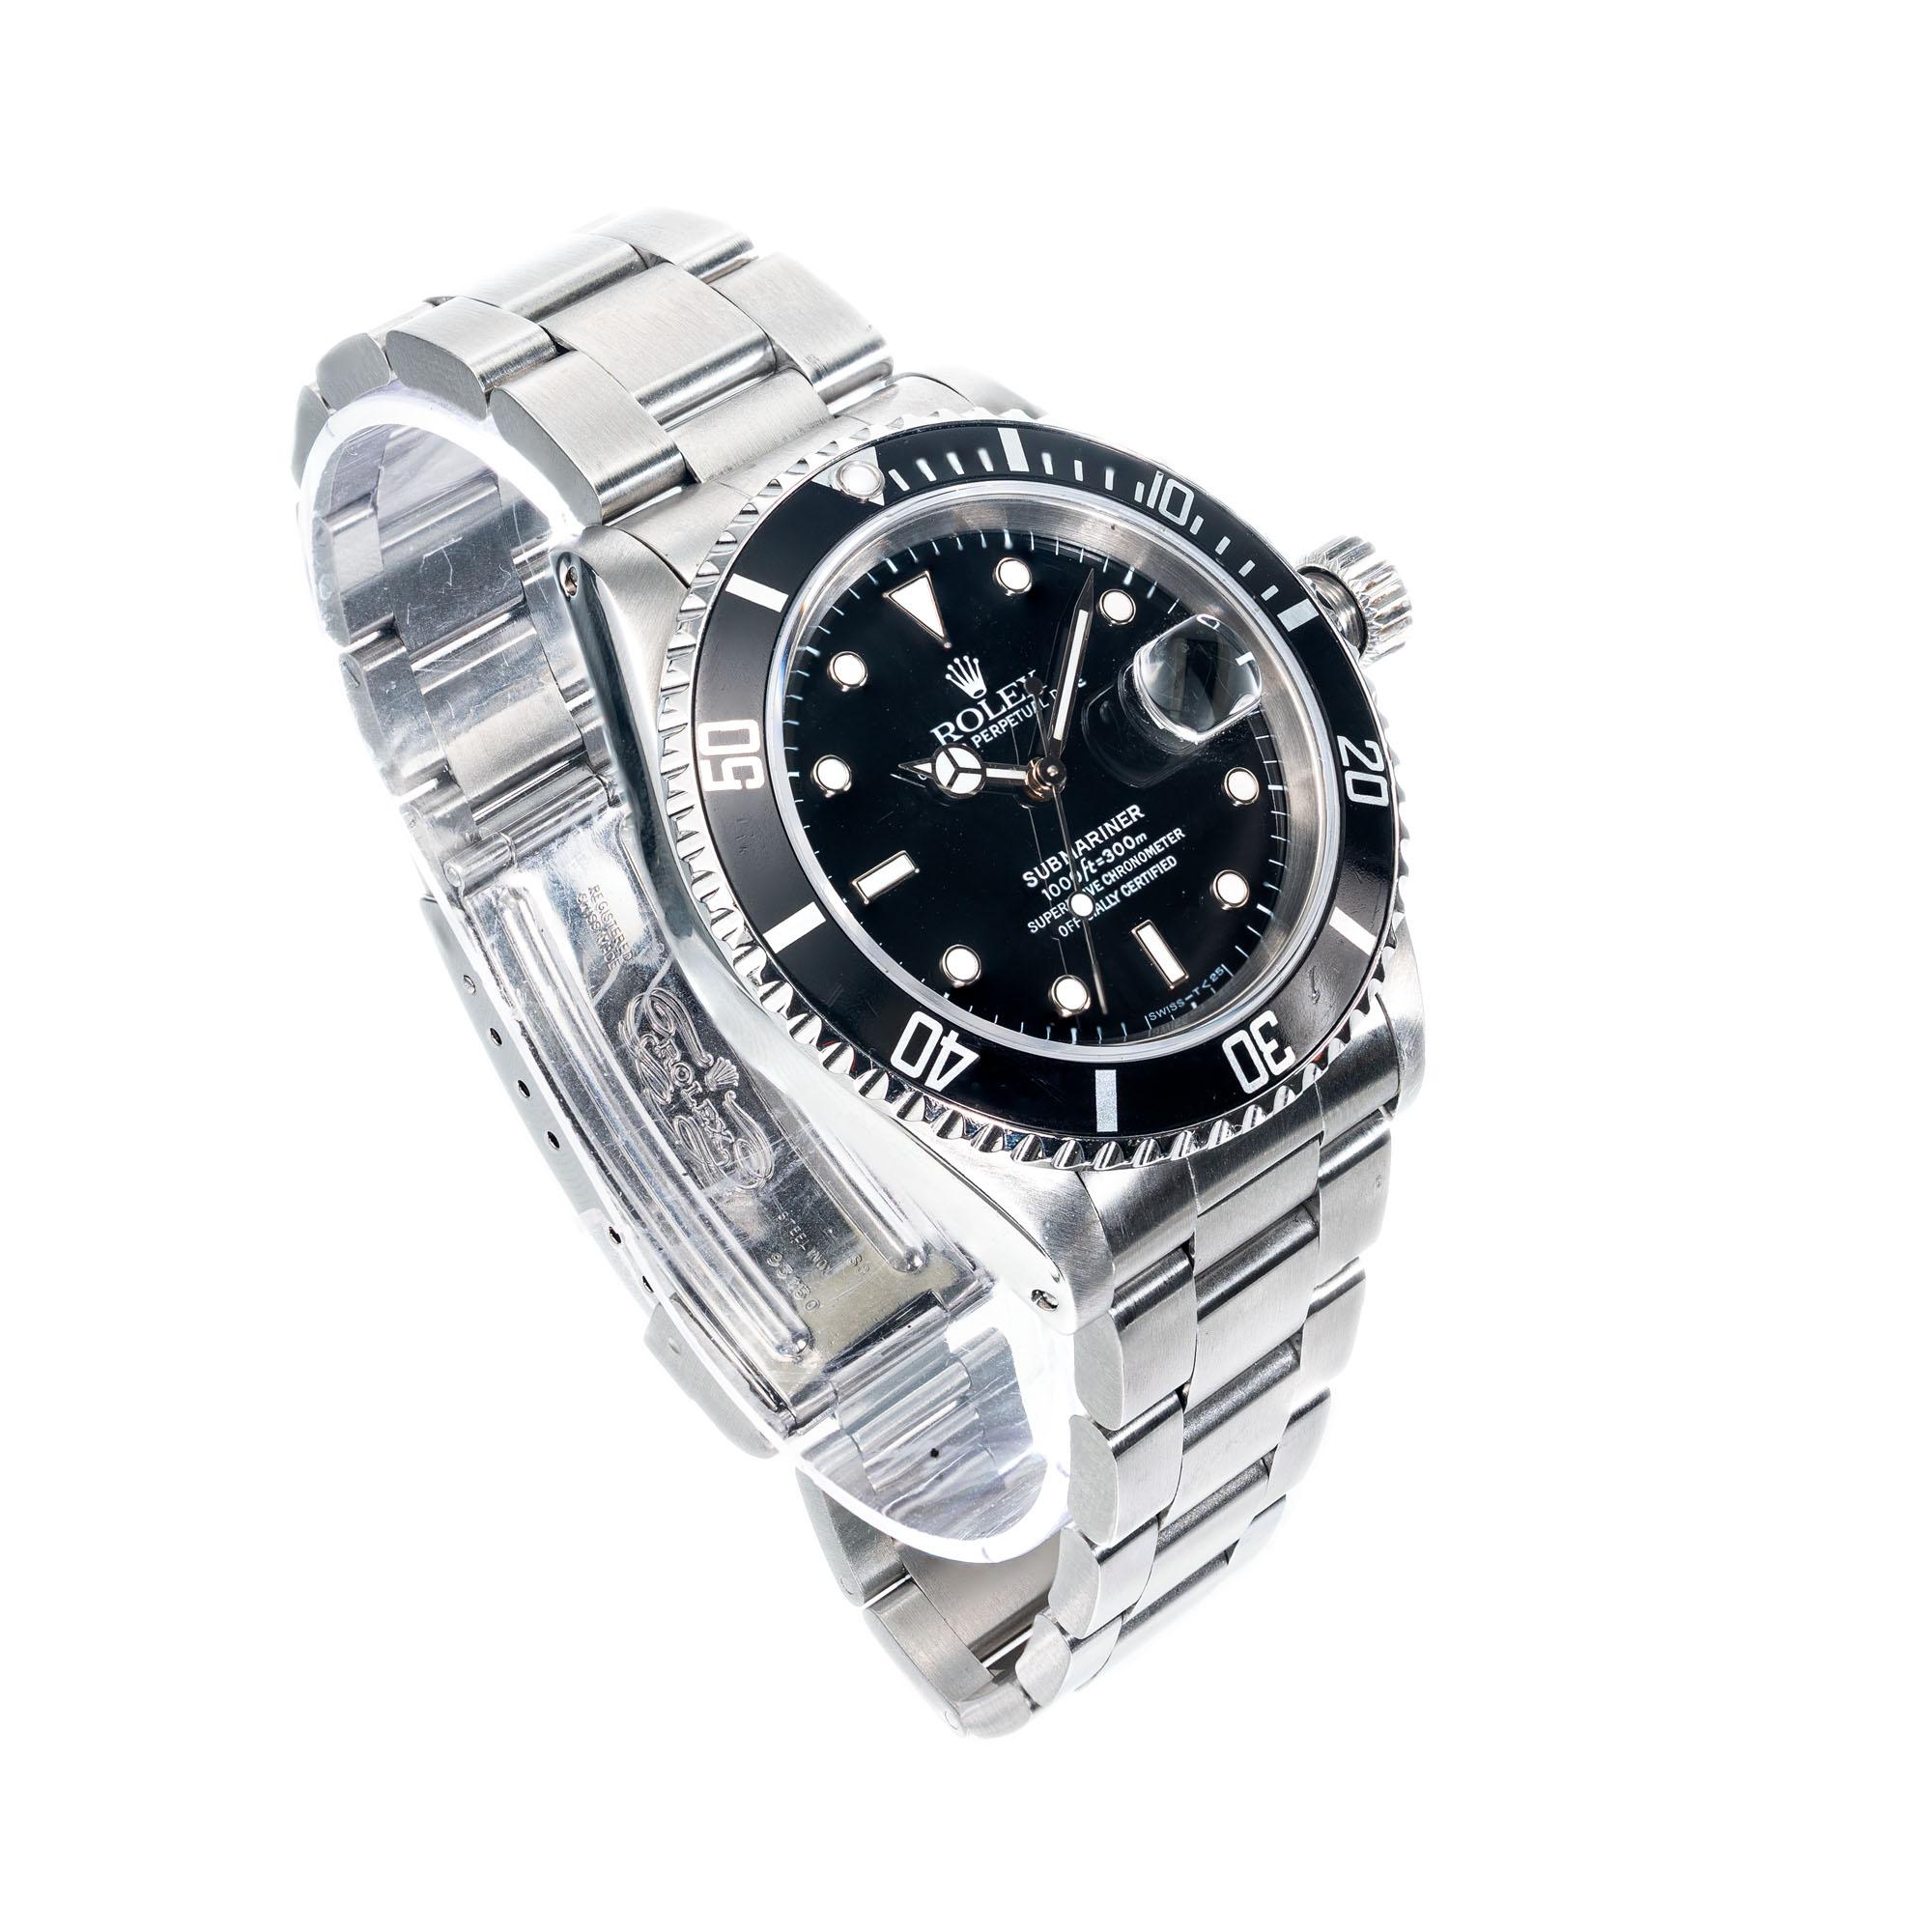 Men's Rolex submariner stainless steel, oyster band wristwatch.  model 16610 circa 1994.  

Length: 47.27mm
Width: 40mm
Band width at case: 20mm
Case thickness: 12.56mm
Crystal: sapphire
Dial: black
Other: Model 16610 Serial # 5180186
135.2